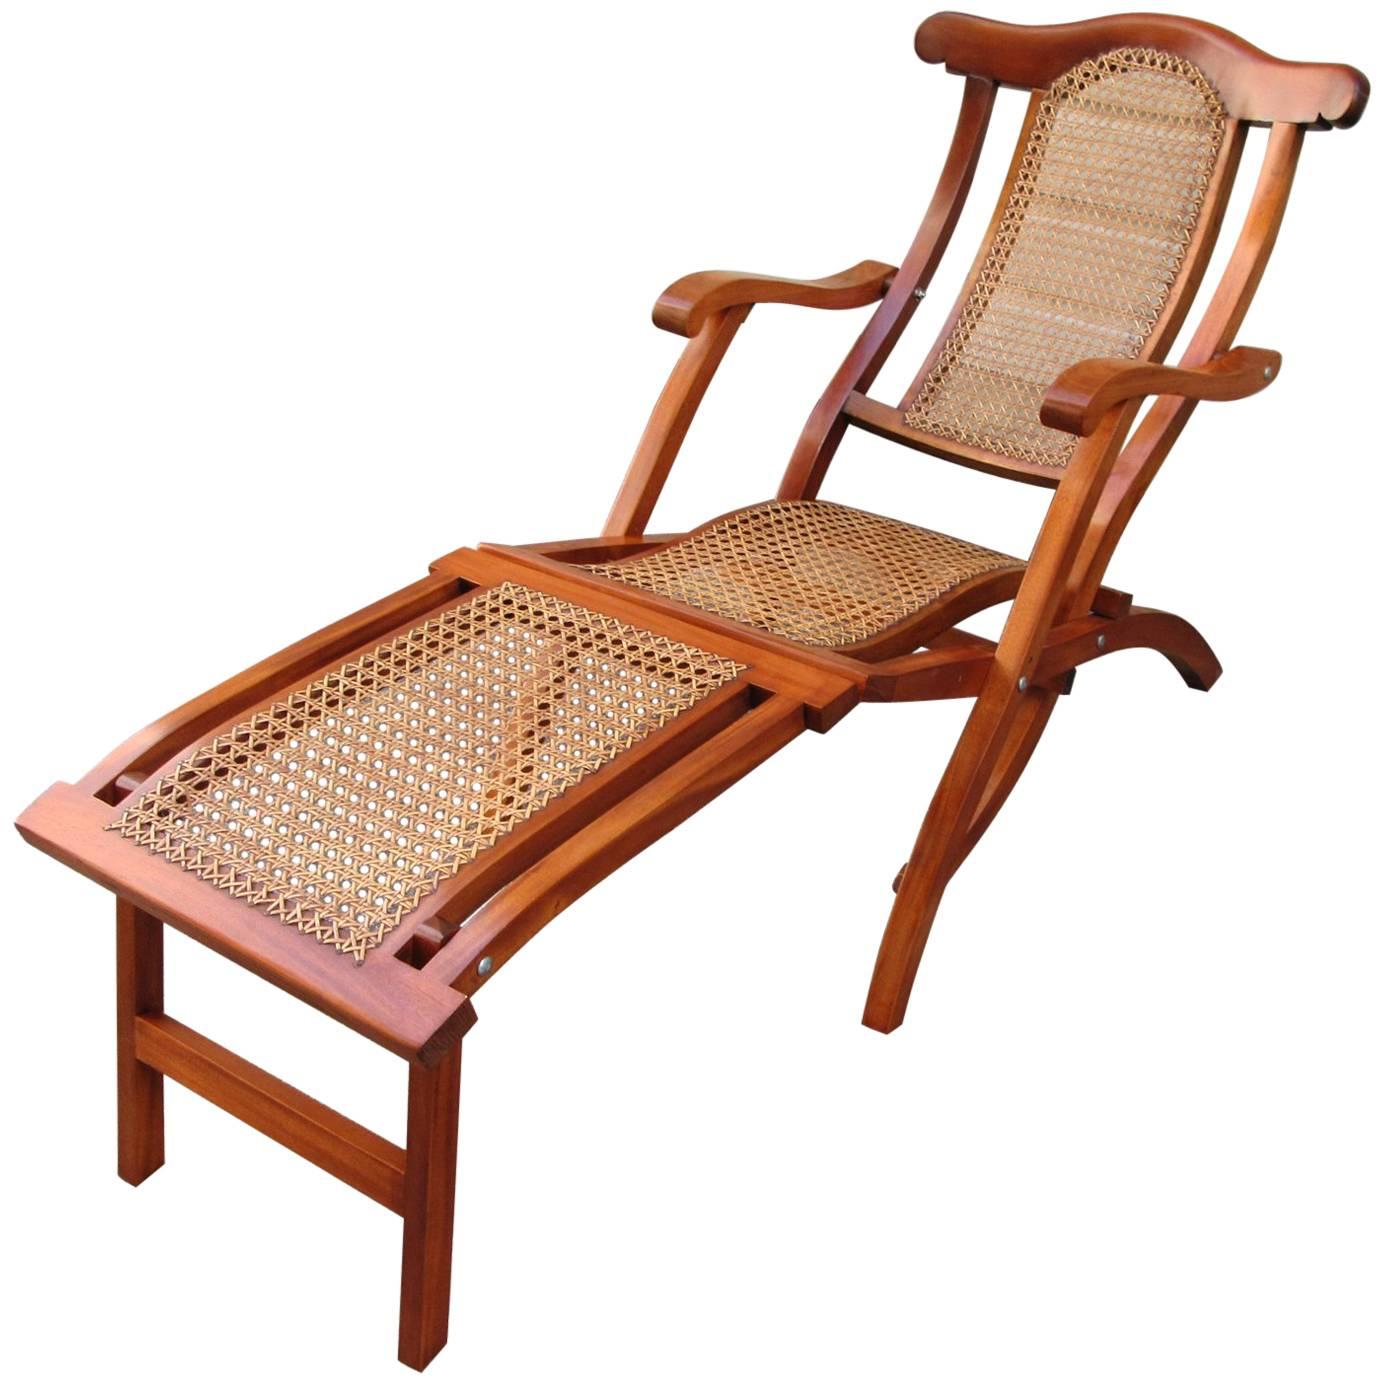 Early 20th Century Caribbean Martinique Mahogany and Cane Folding Deck Chair